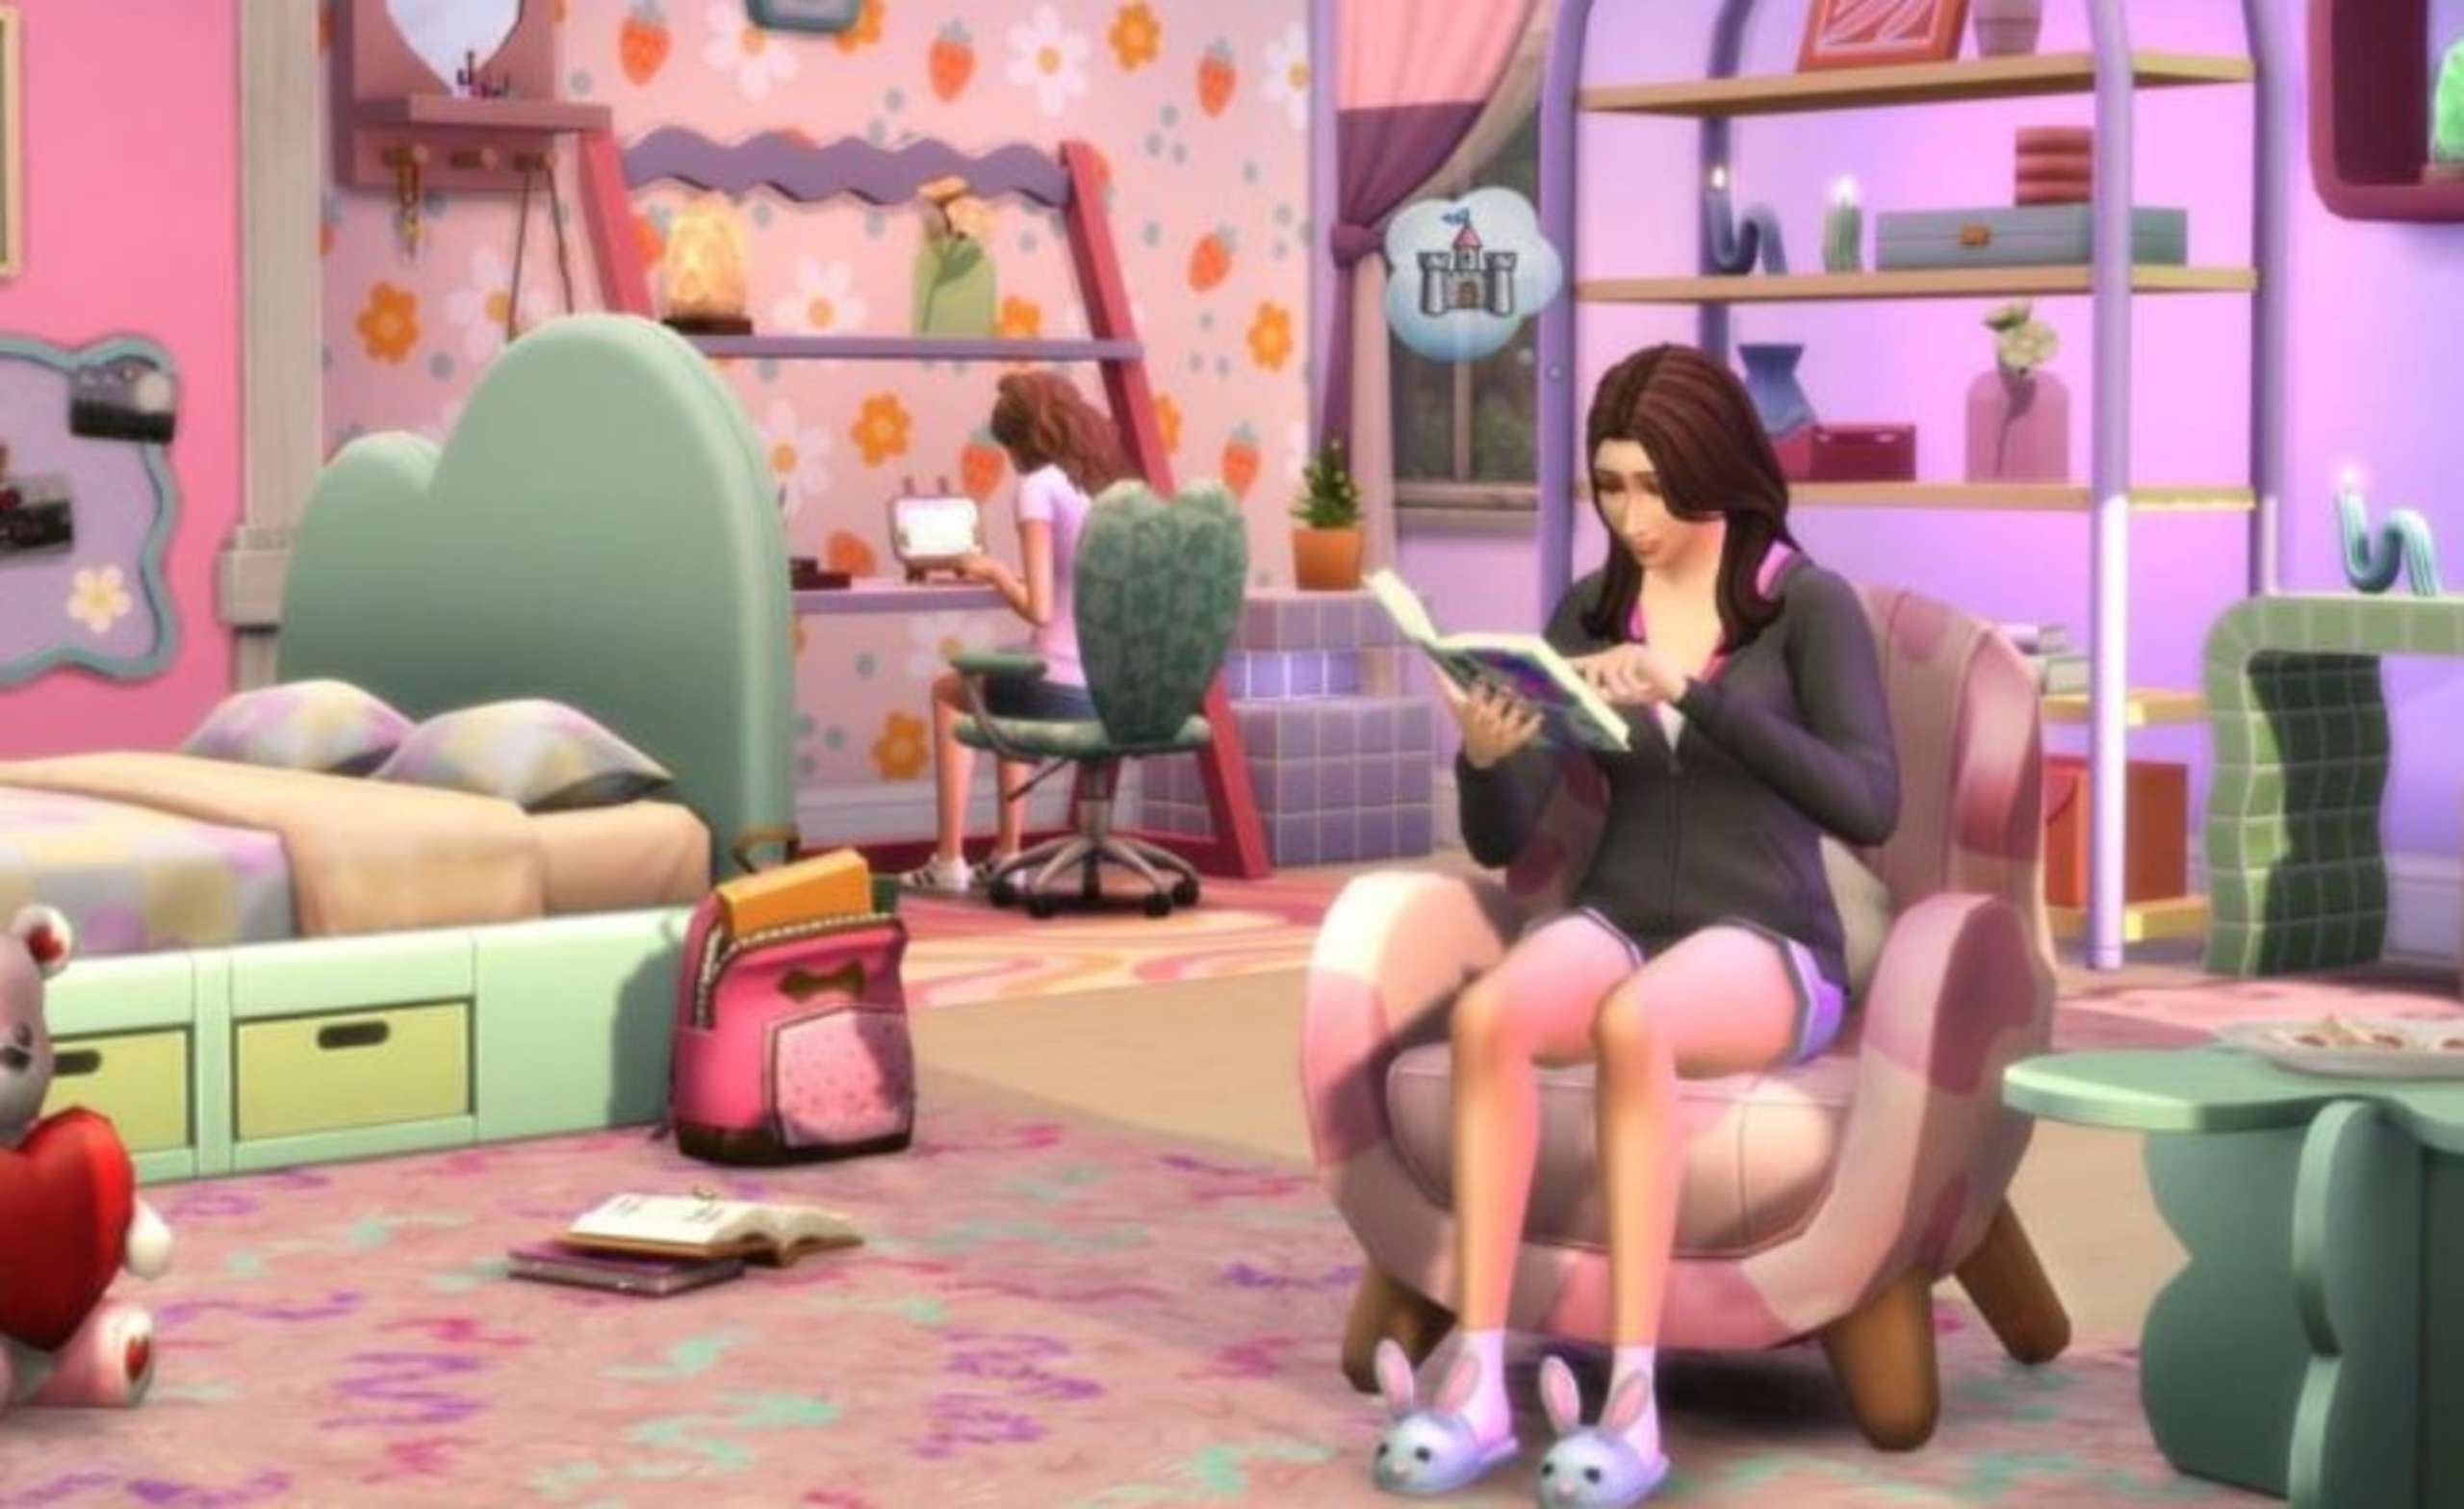 The Latest Sims 4 Expansion Pack, Pastel Pop, Will Be Published This Month, And It Has Been Announced That The Sims Team Collaborated With The Renowned Content Designer Plumbella On It